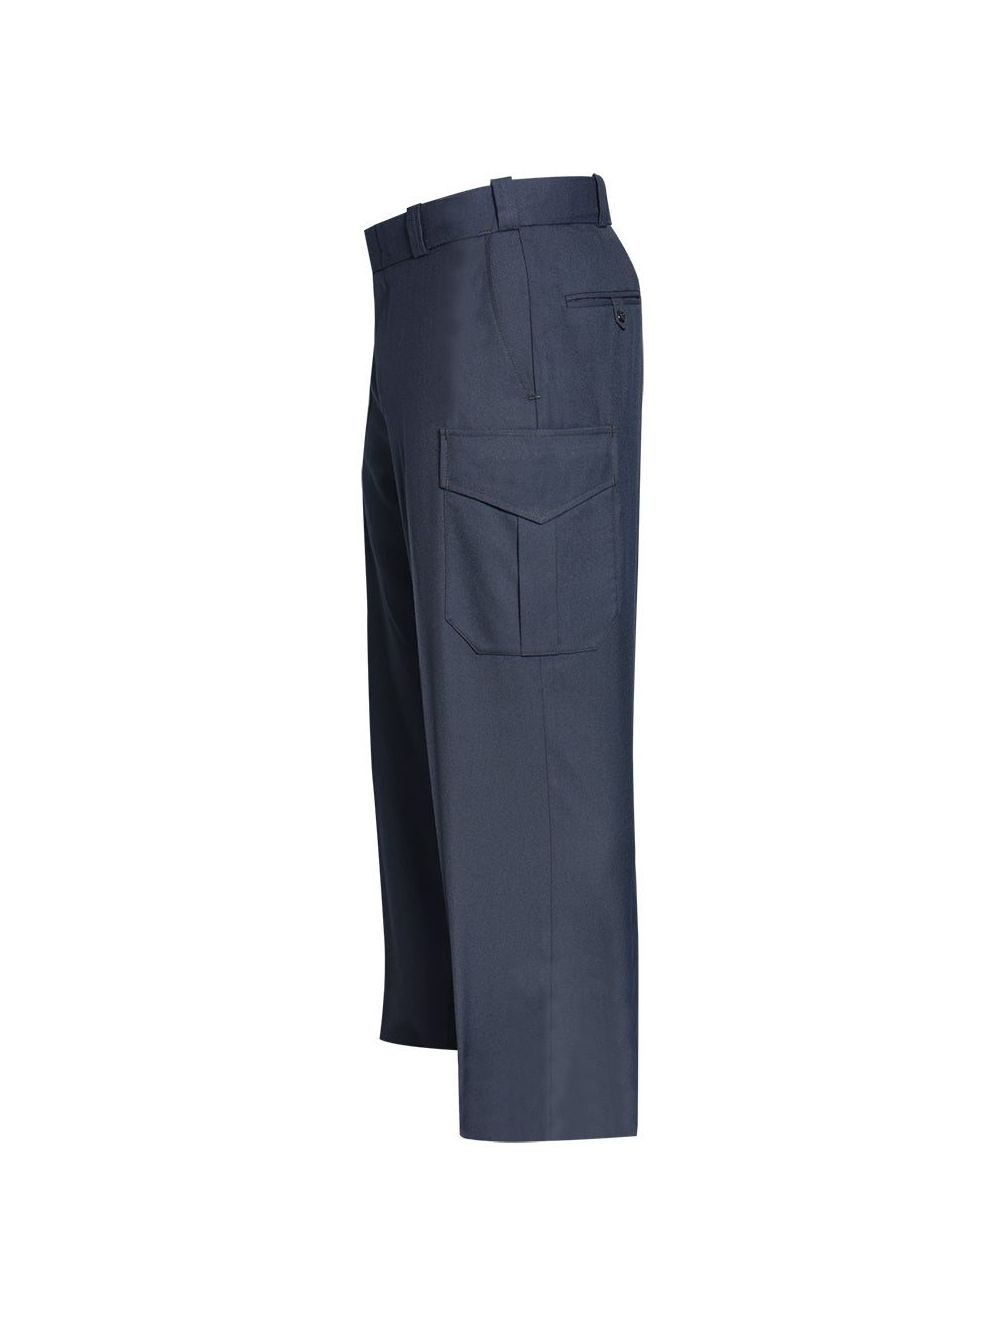 Justice Pants w/ Cargo Pockets - LAPD Navy